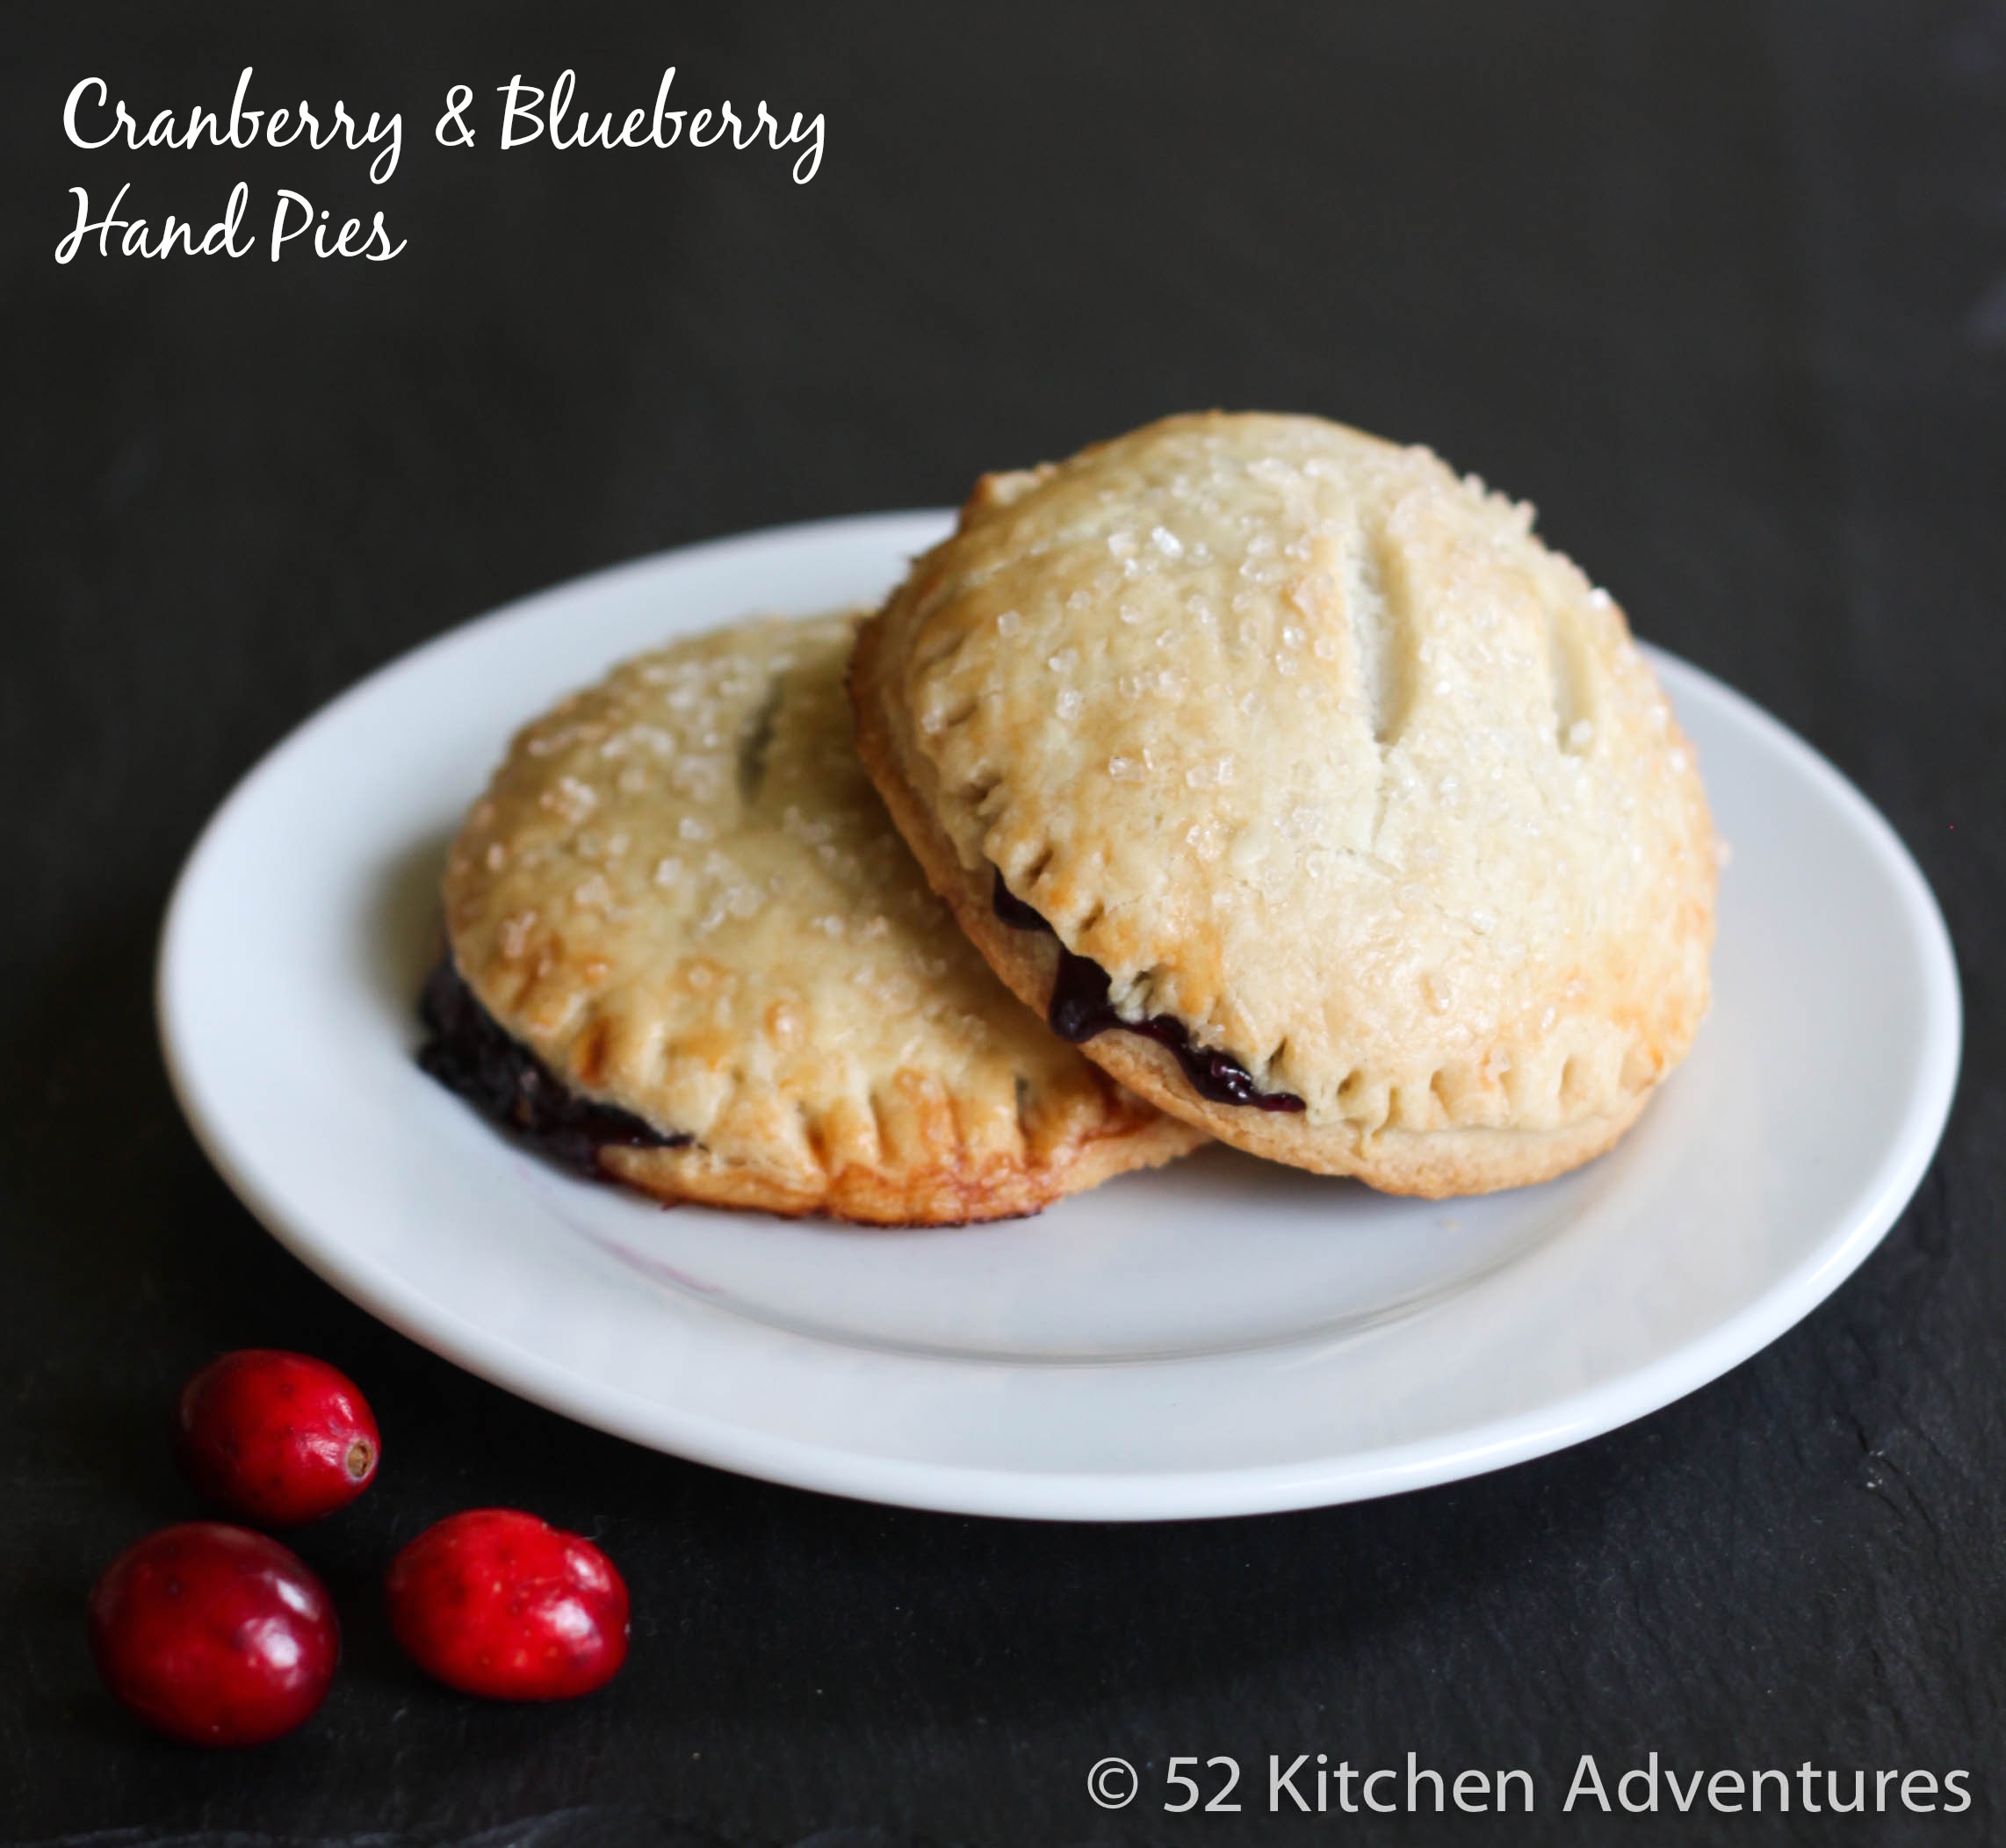 Cranberry & Blueberry Hand Pies